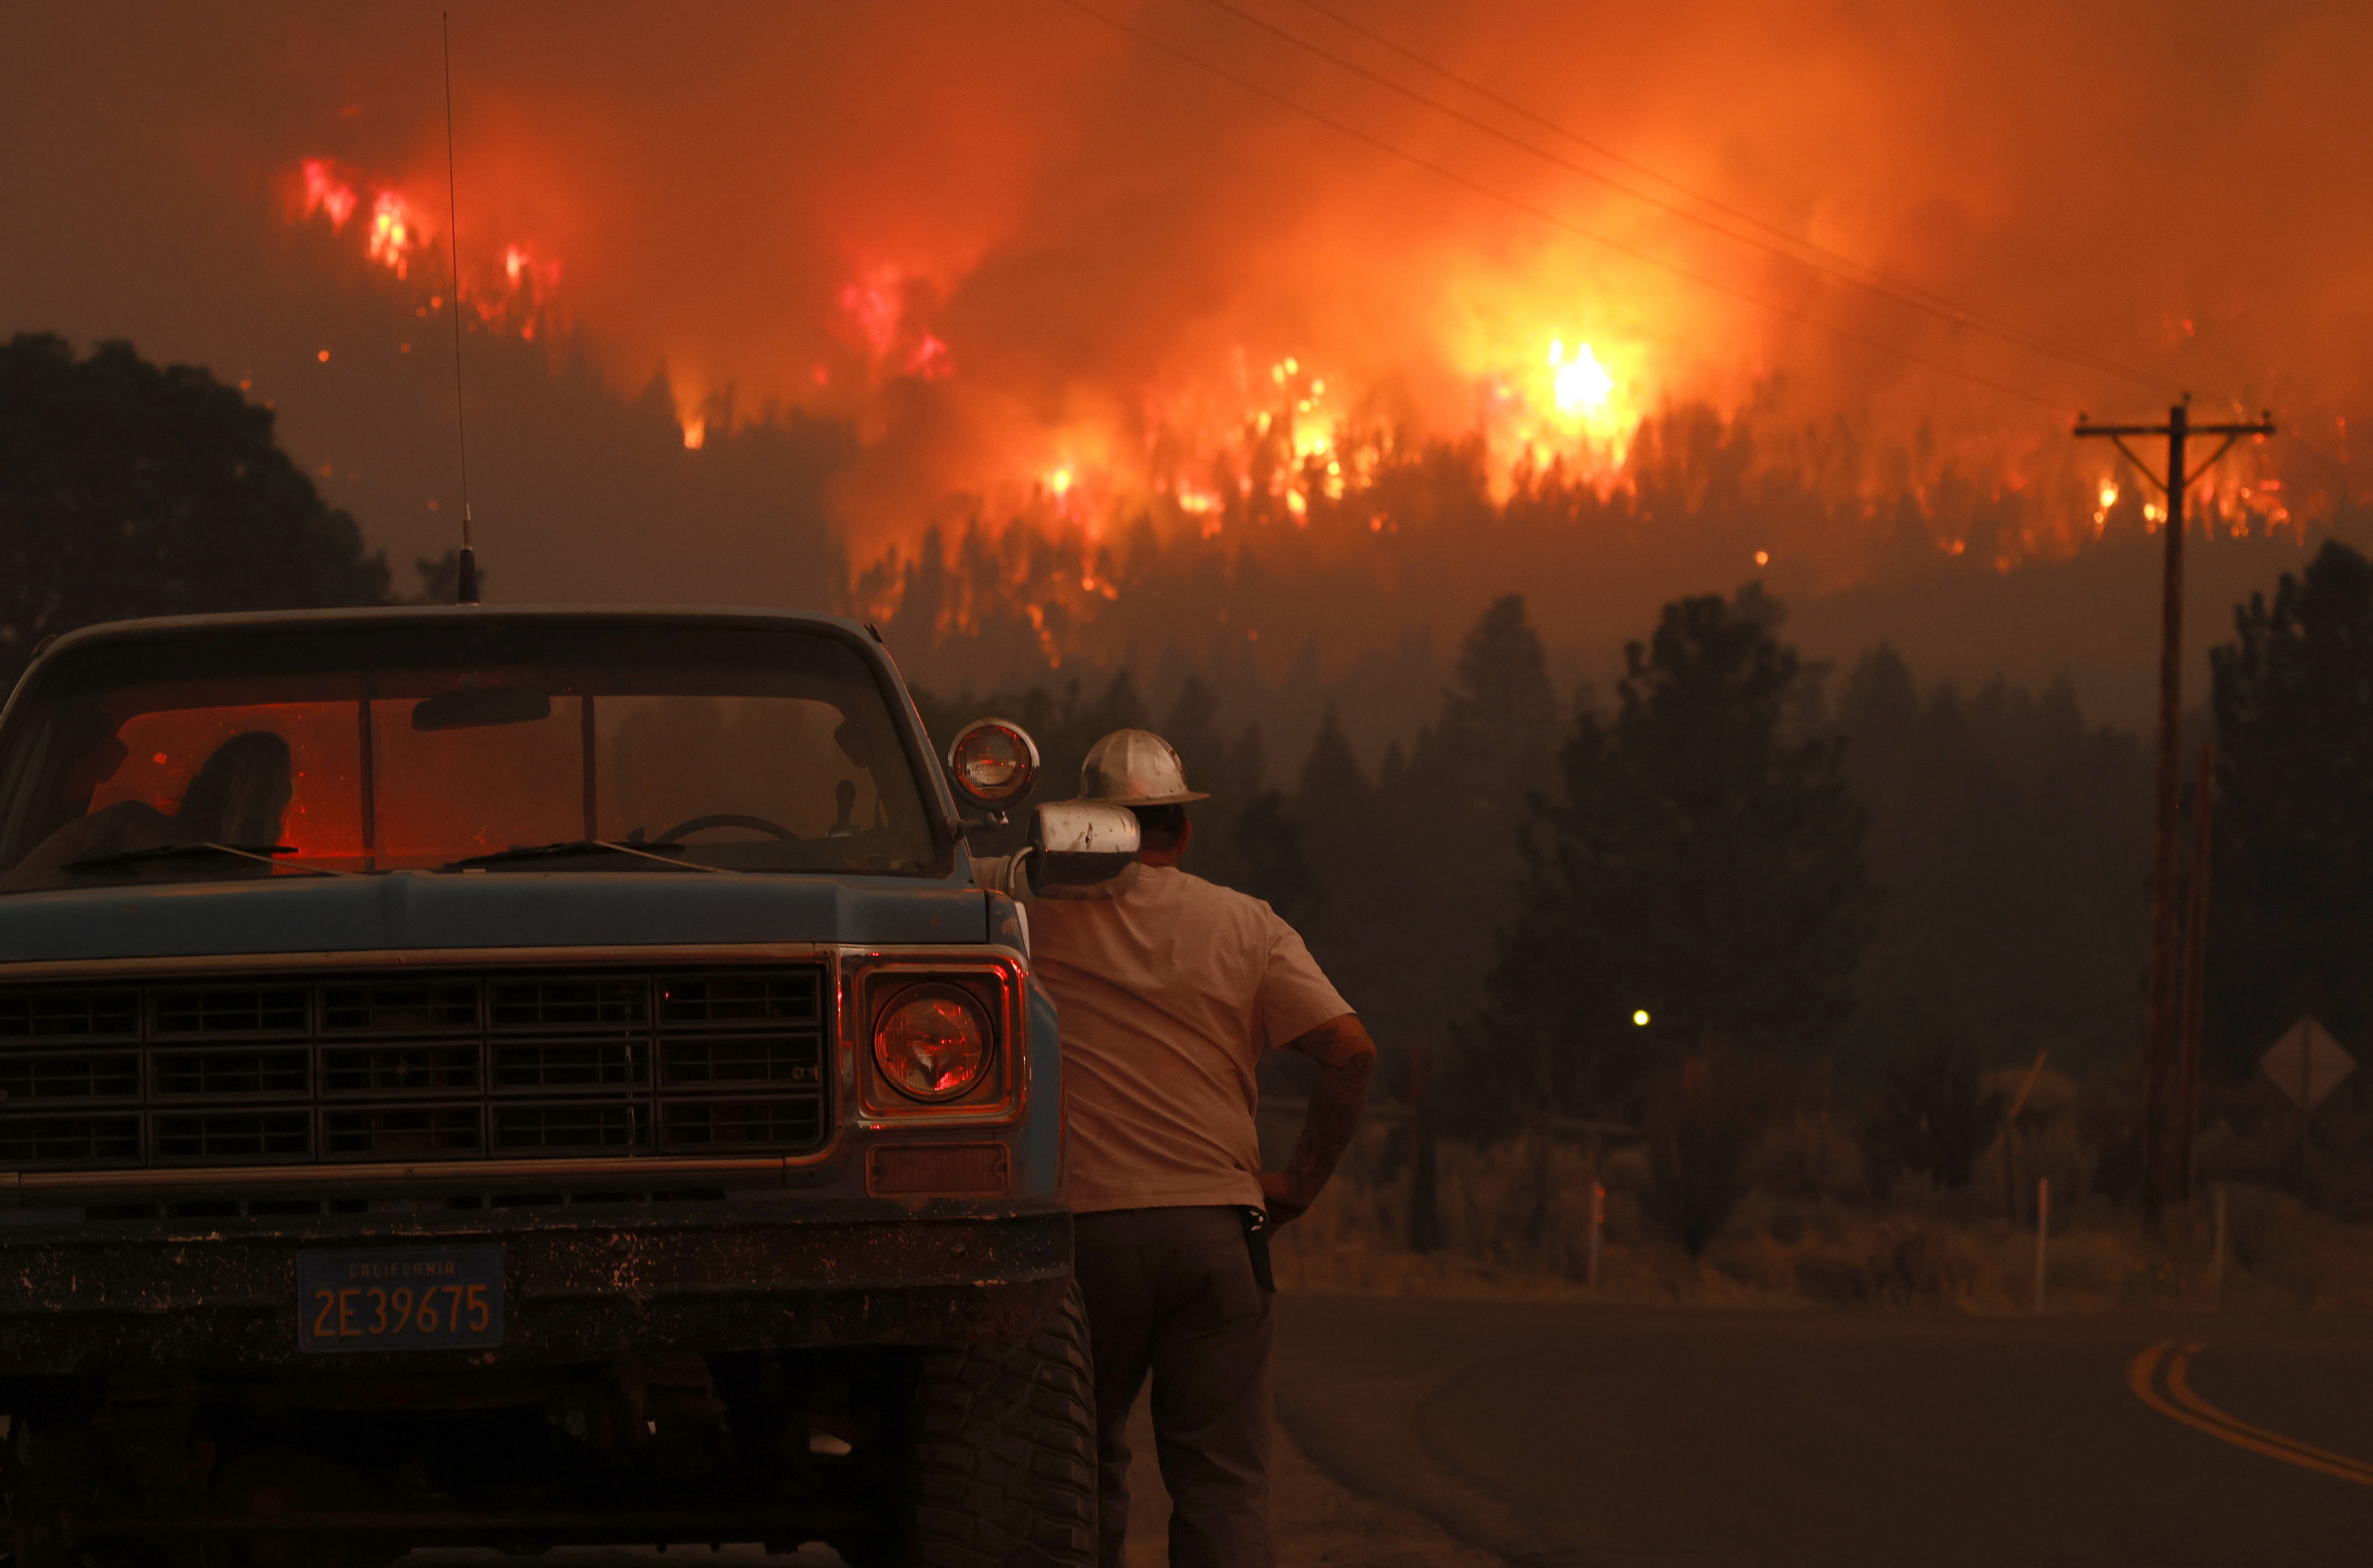 Dixie Fire Grows to 604K Acres, Red Flag Warning Remains in Effect Due